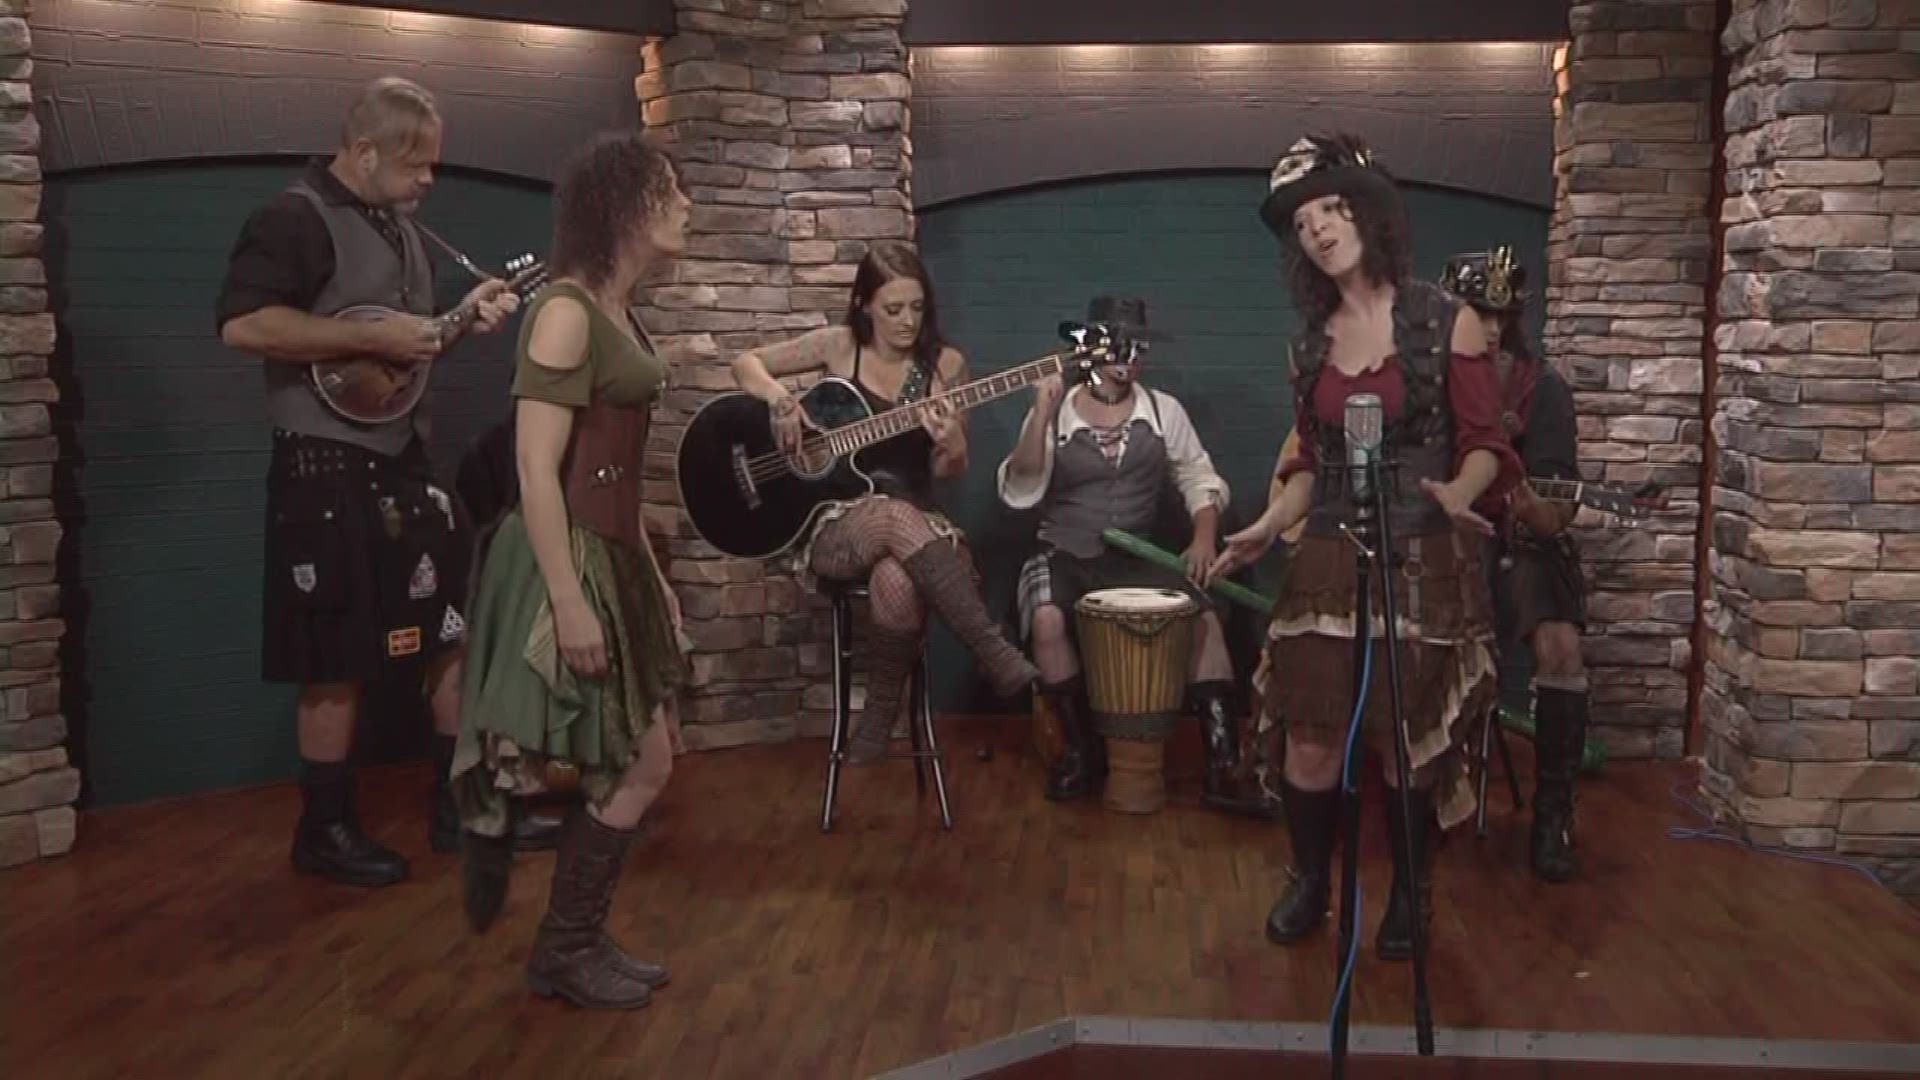 Knoxville may be the cradle of country music, but Bristol is where it all began. East Tennessee band Tuatha Dea performs ahead of the release of the new Bristol Sessions.